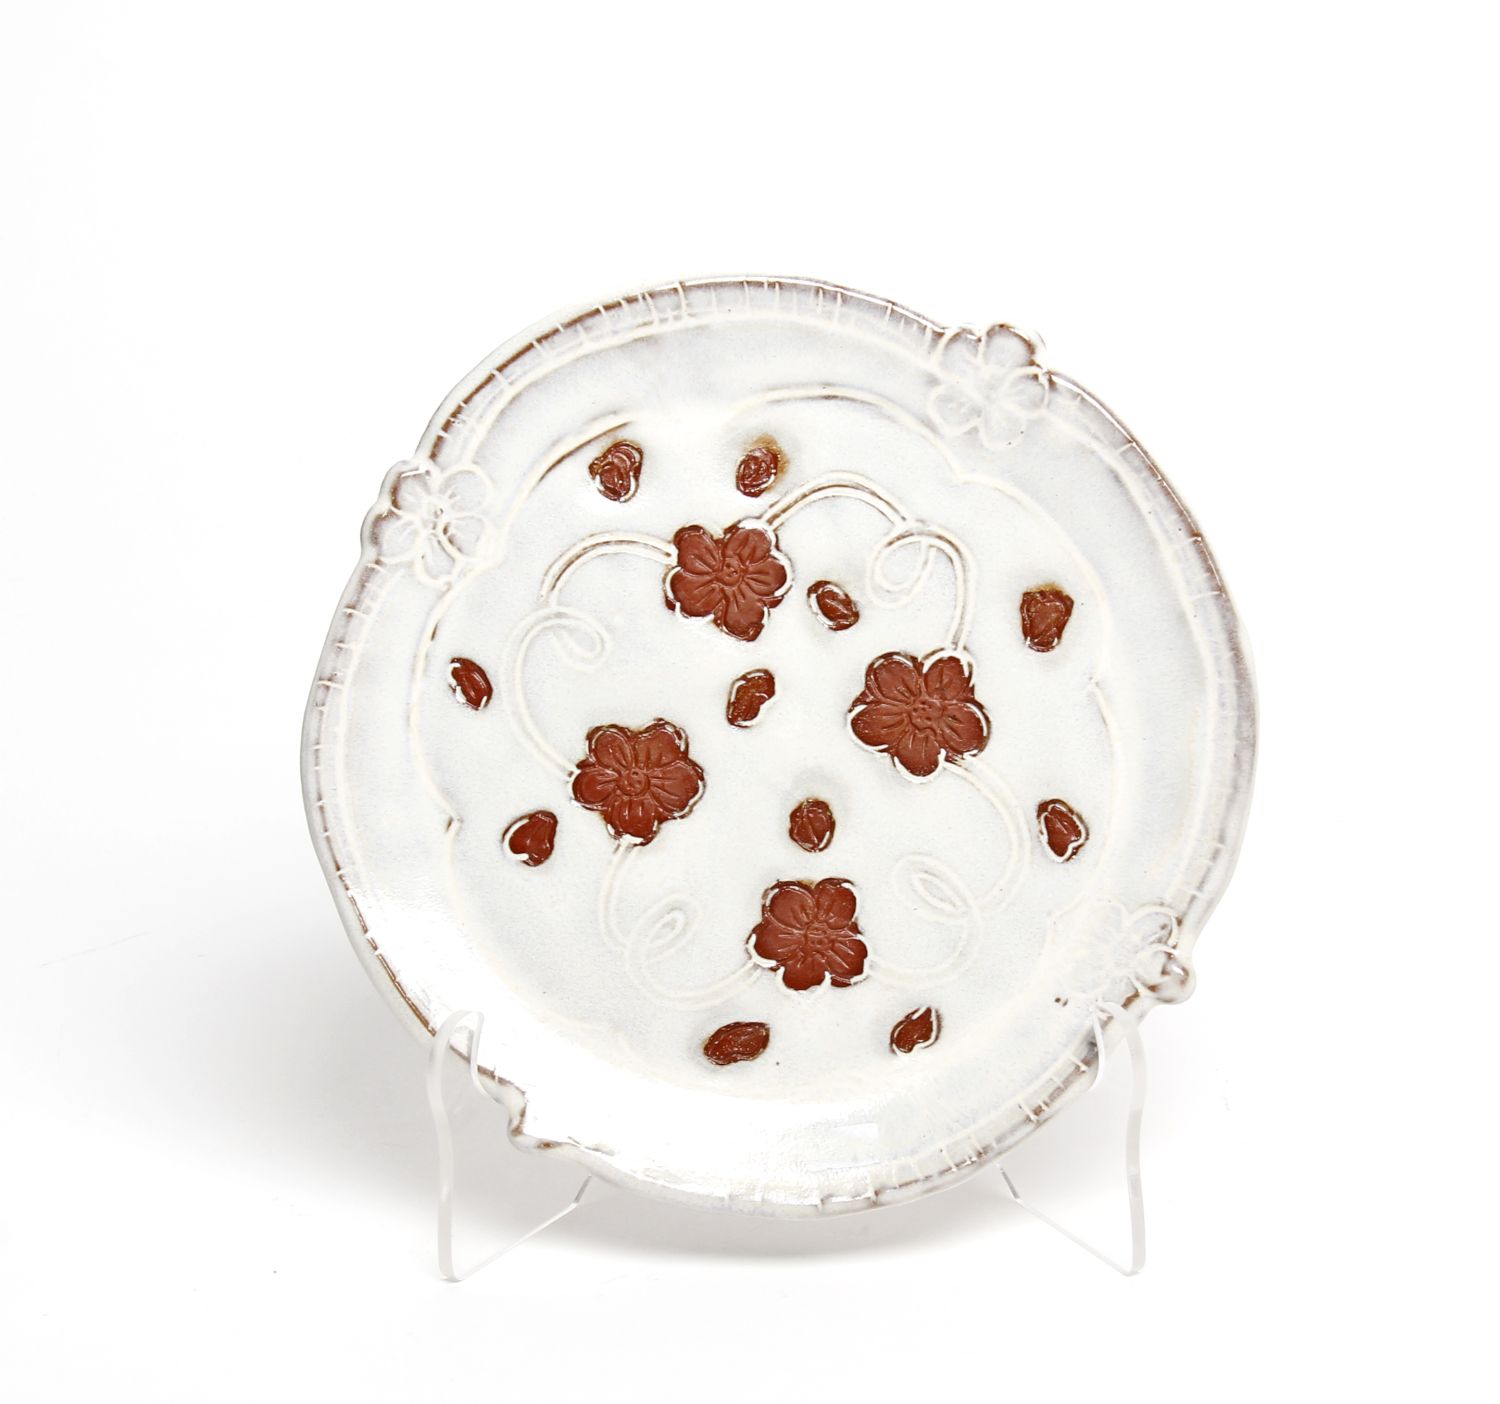 Zoe Pinnell: Small White Floral Plate Product Image 1 of 3